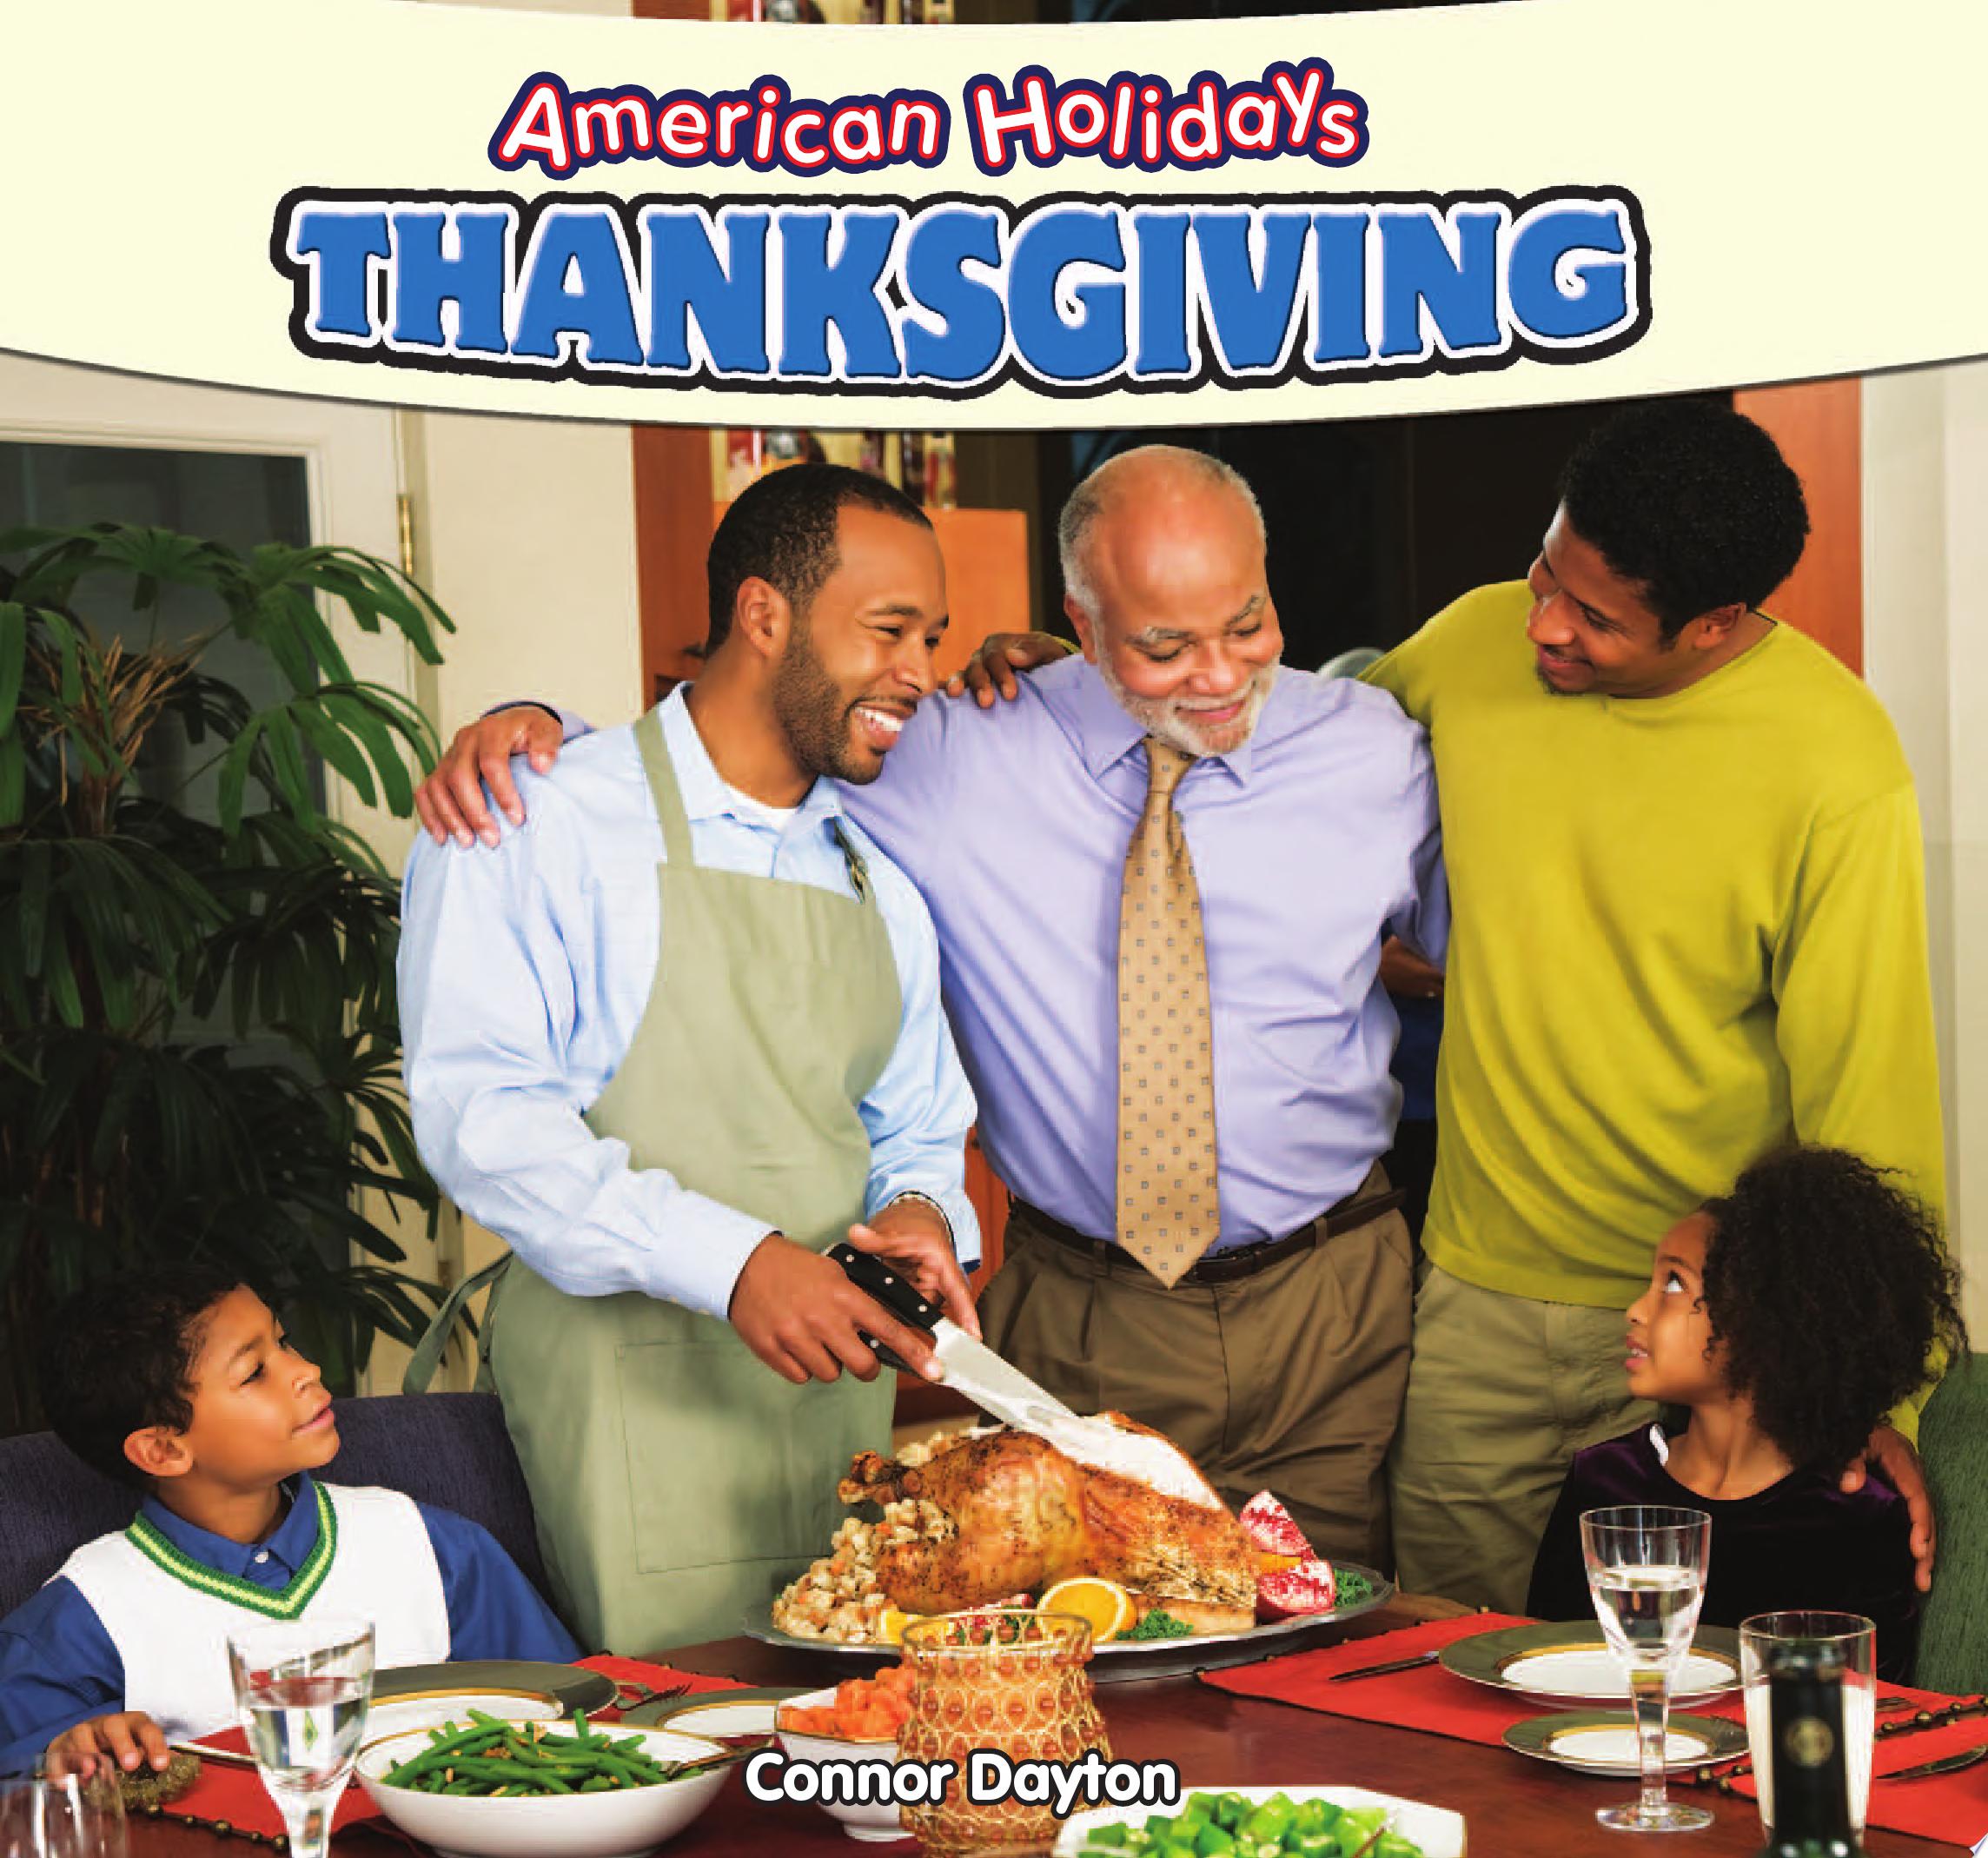 Image for "Thanksgiving"